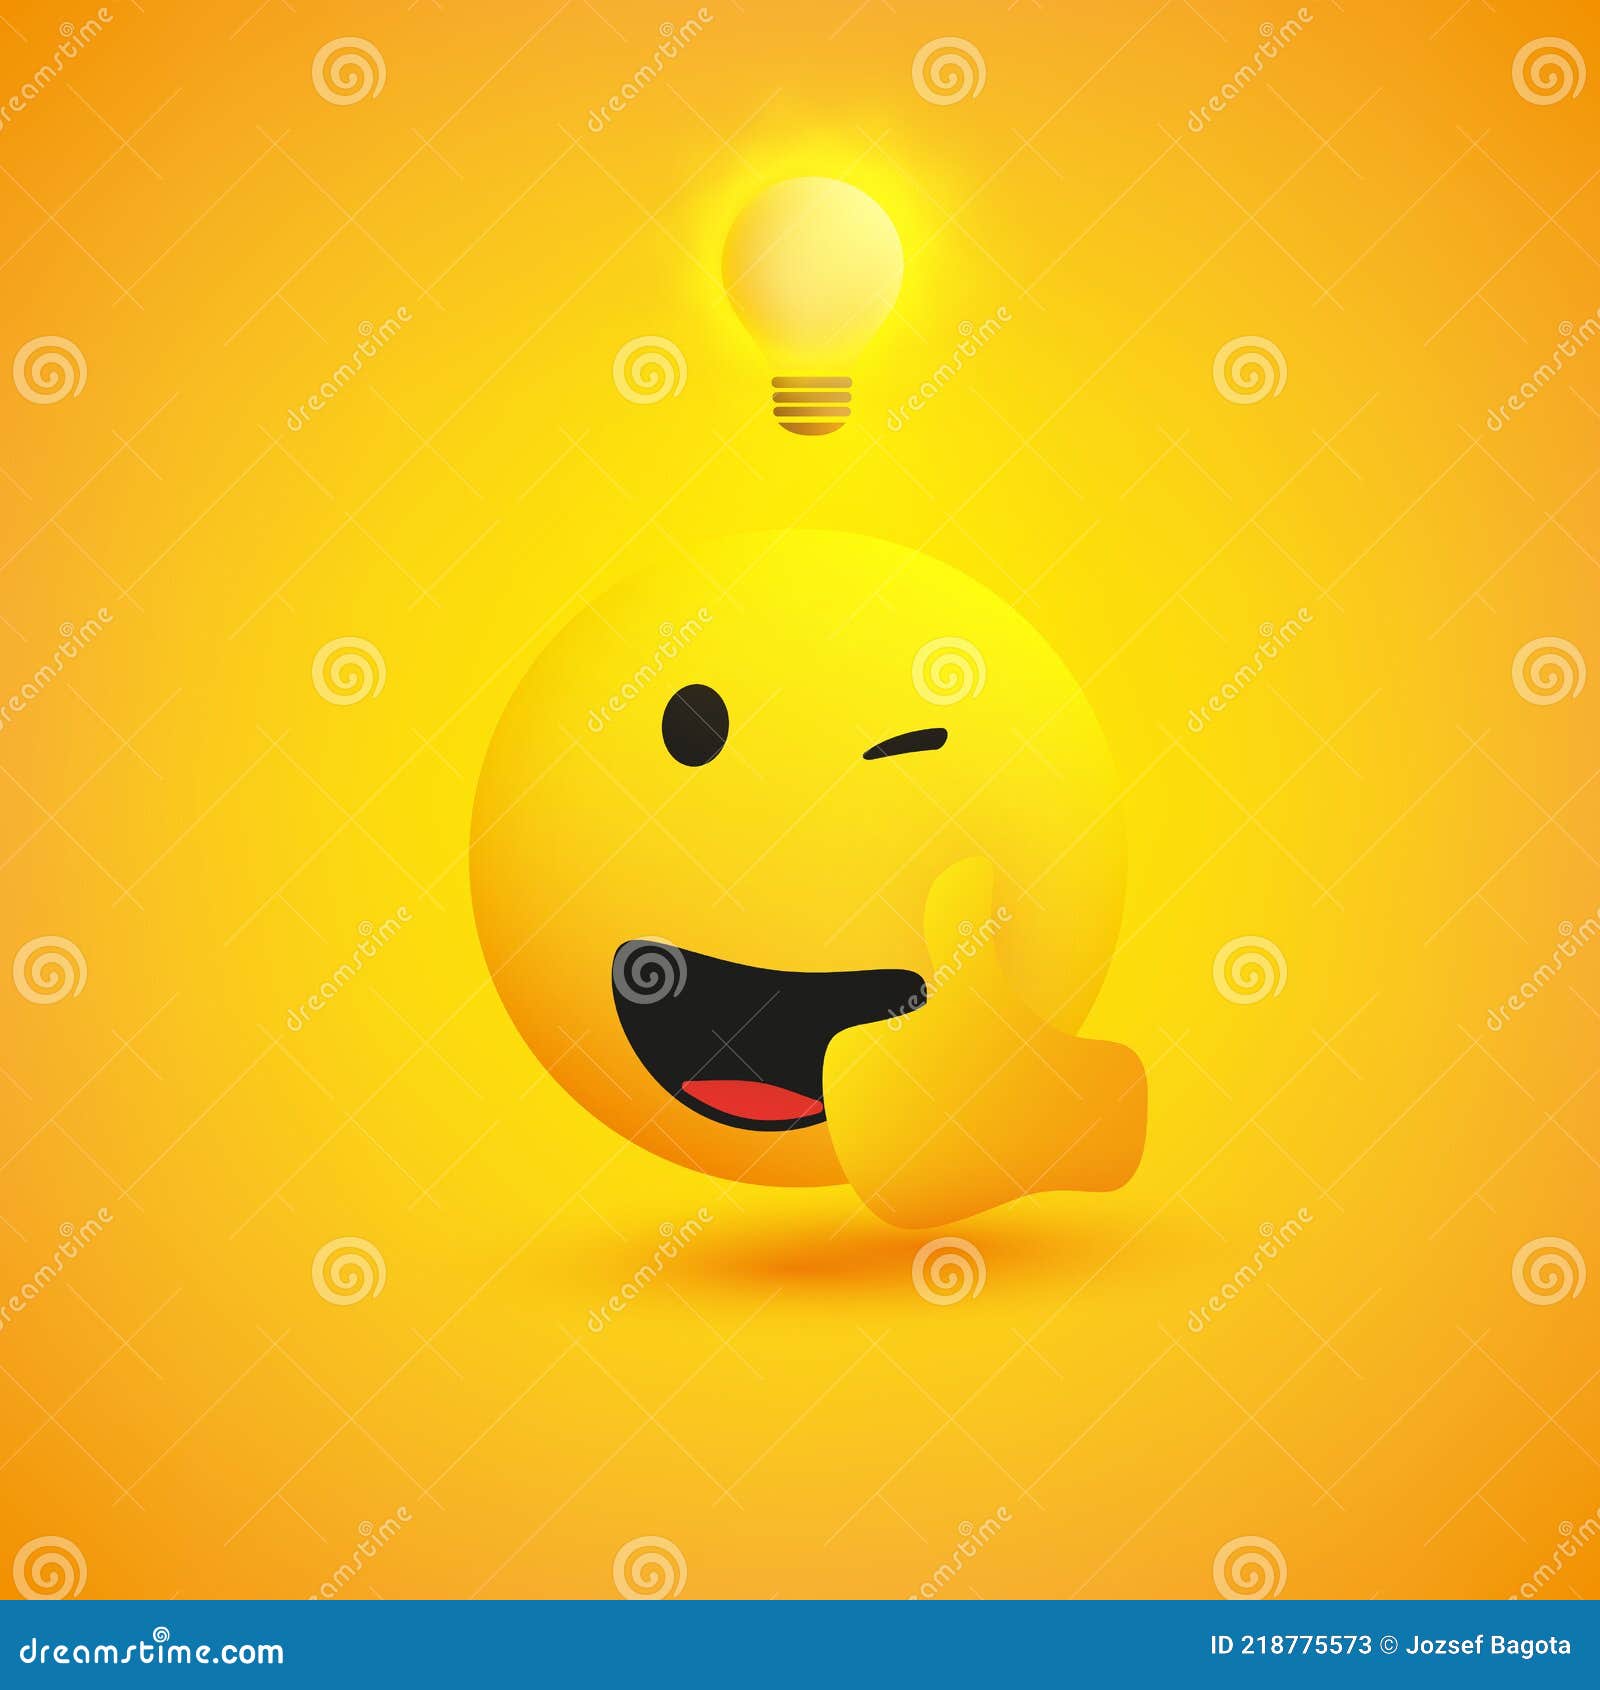 Bortset Gør alt med min kraft Indflydelse New Ideas - Smiling and Winking Emoji Showing Thumbs Up - Simple Shiny  Happy Emoticon with Light Bulb on Yellow Background Stock Vector -  Illustration of business, happy: 218775573